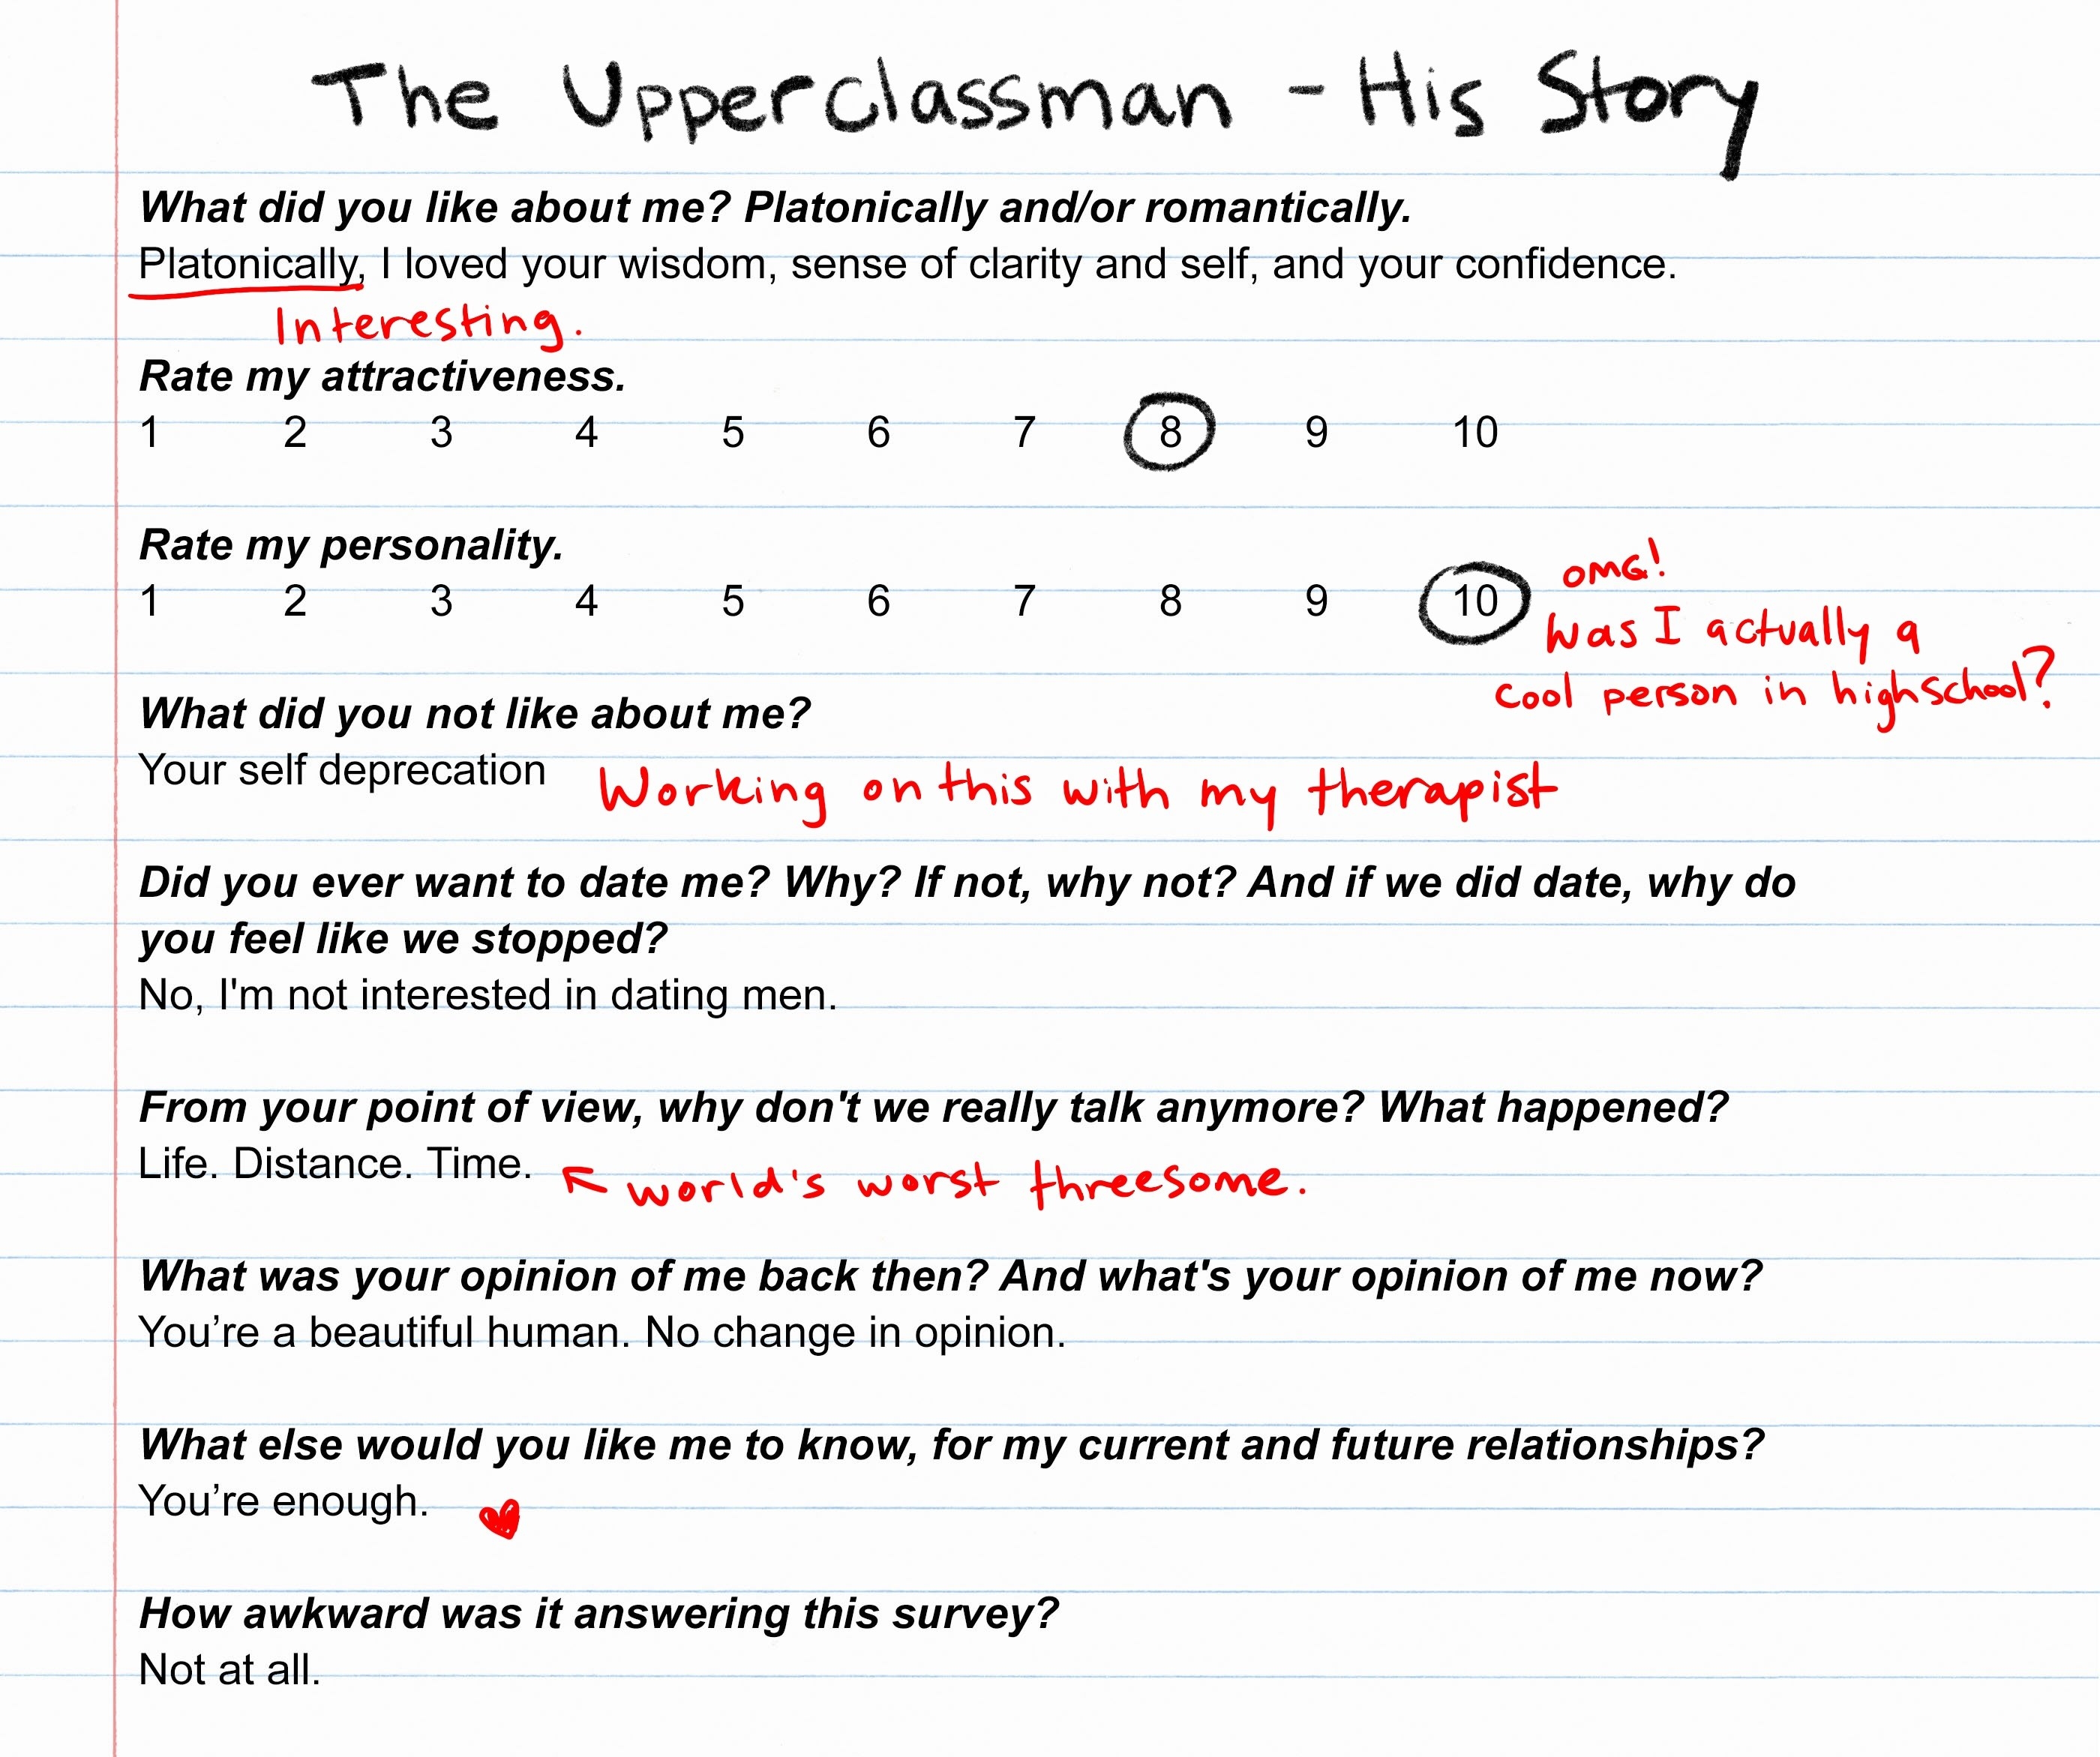 The Upperclassman&#x27;s survey responses on lined paper with notes from the author